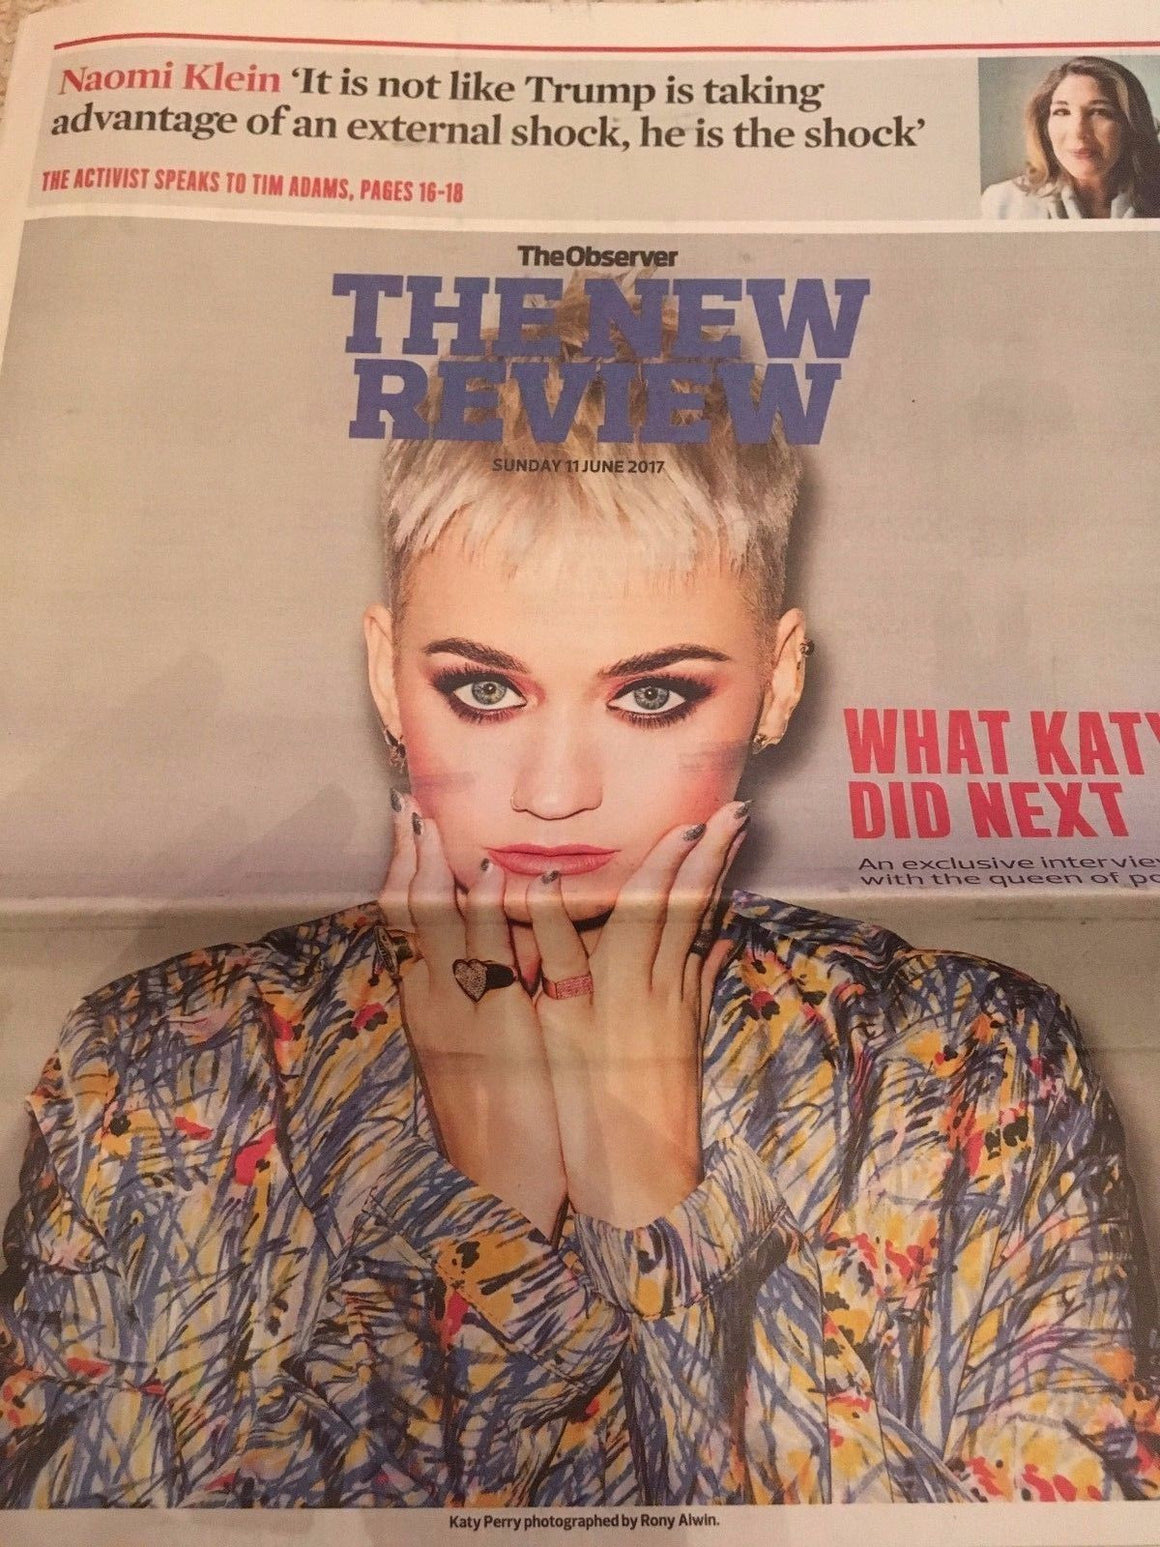 Witless KATY PERRY Photo Cover interview UK Observer Review June 2017